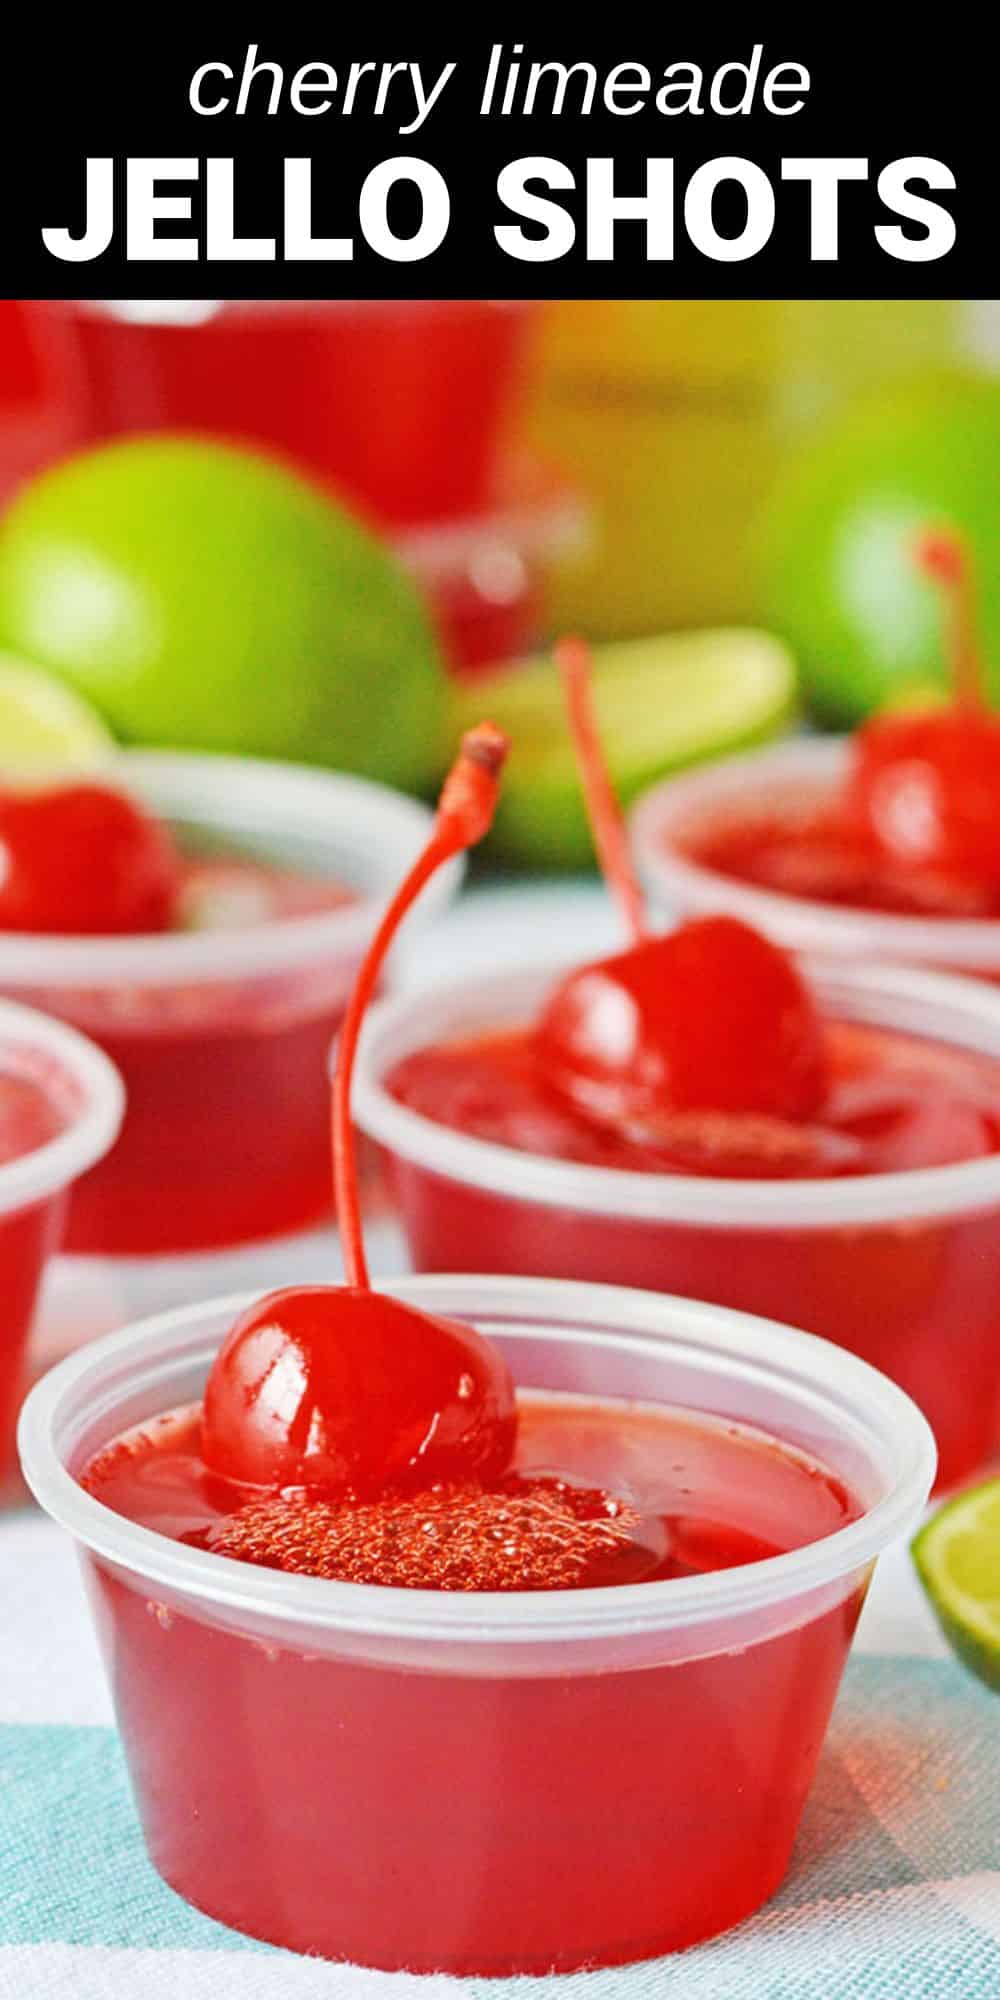 These cherry limeade Jello shots combine the sweet tart flavor of the delicious summer beverage with a fun and boozy shot.